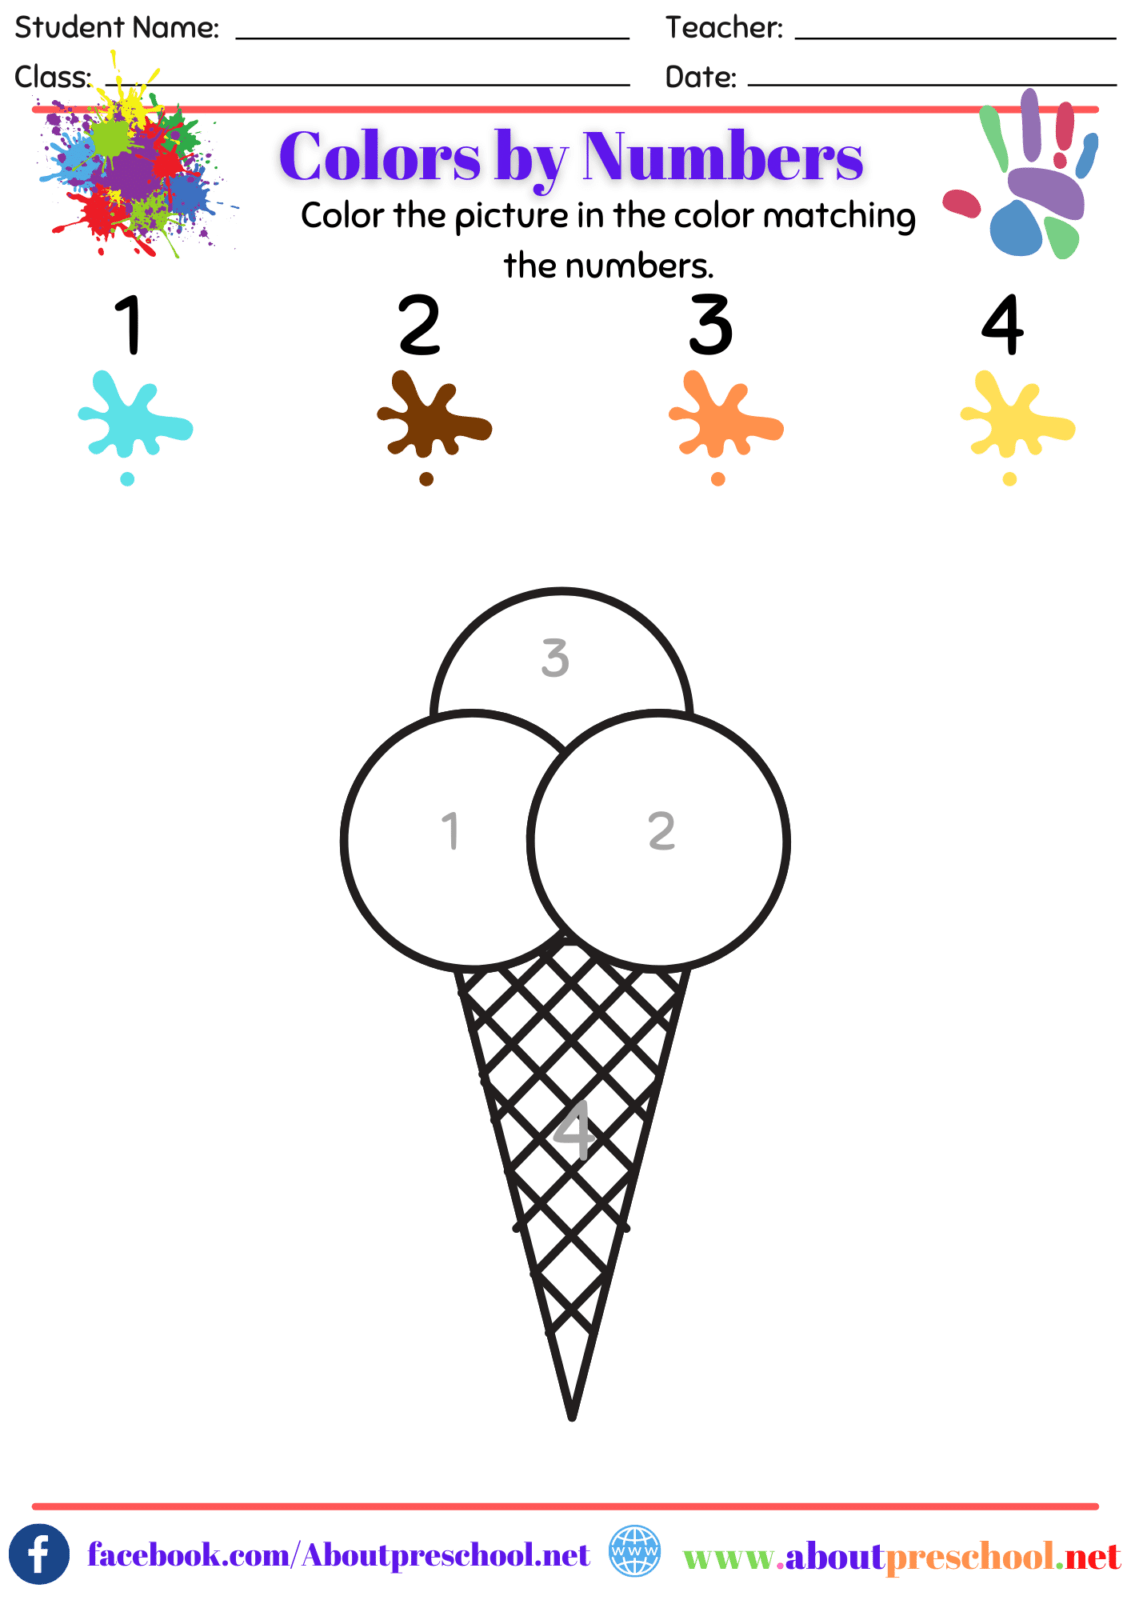 Colors by Numbers-13